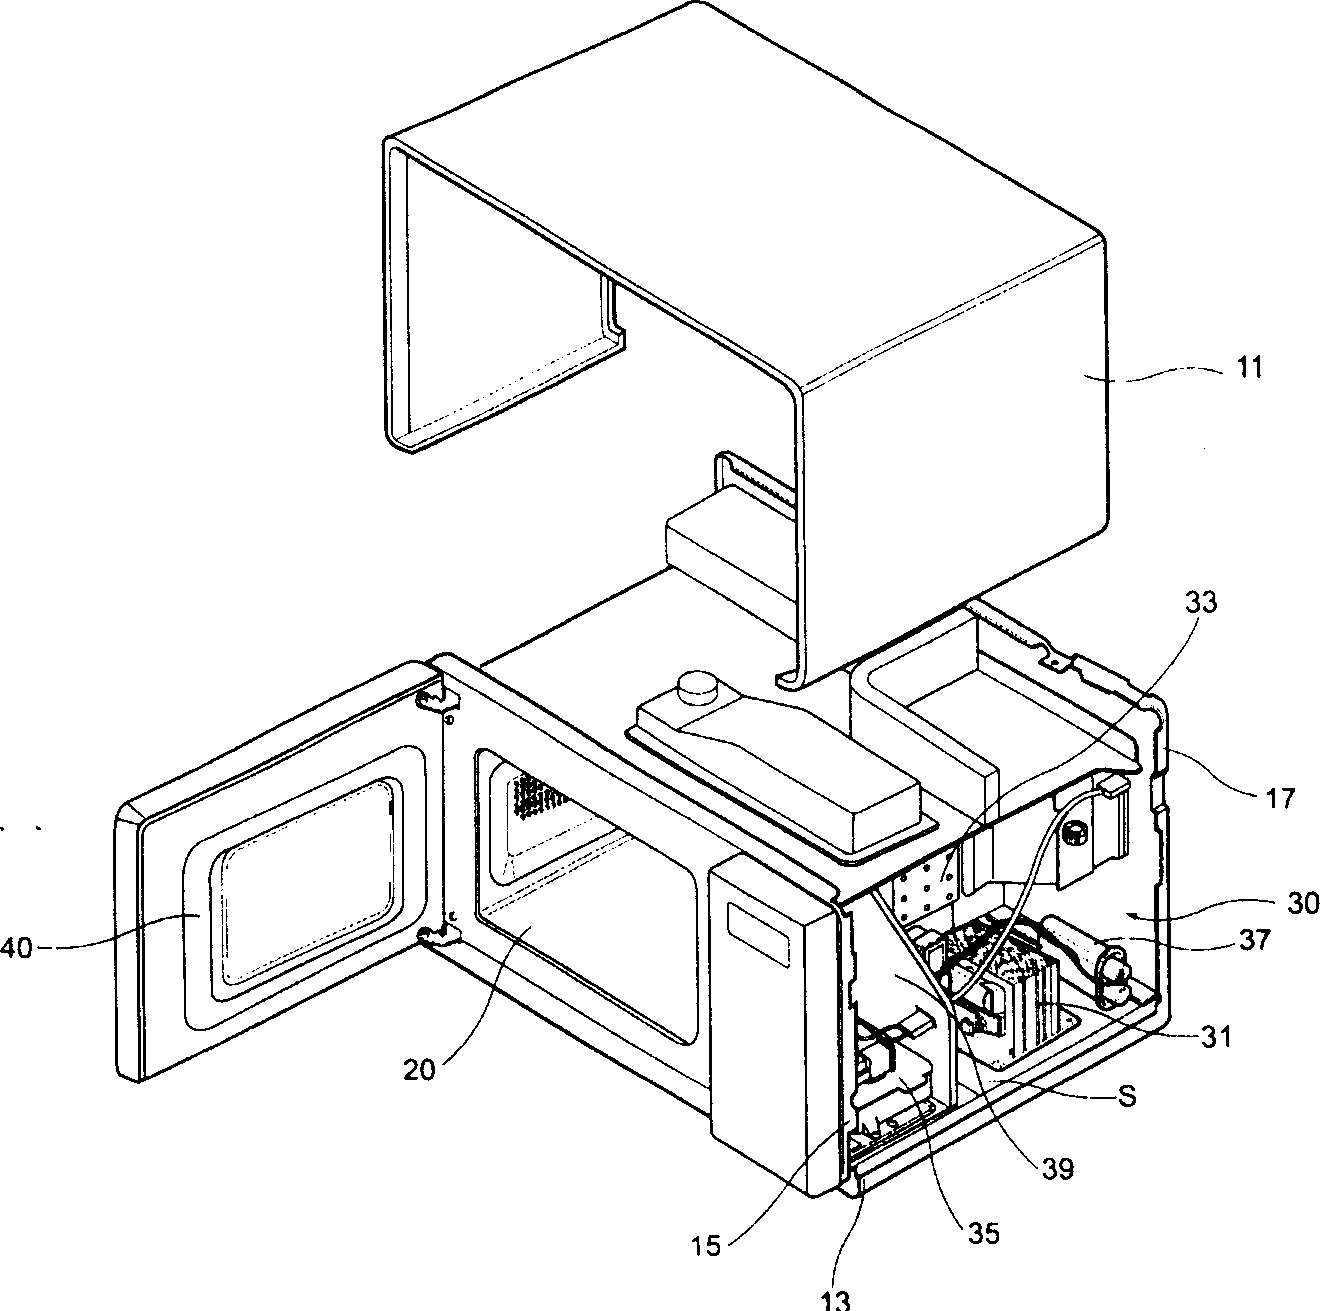 Hinge assembly structure for microwave oven door